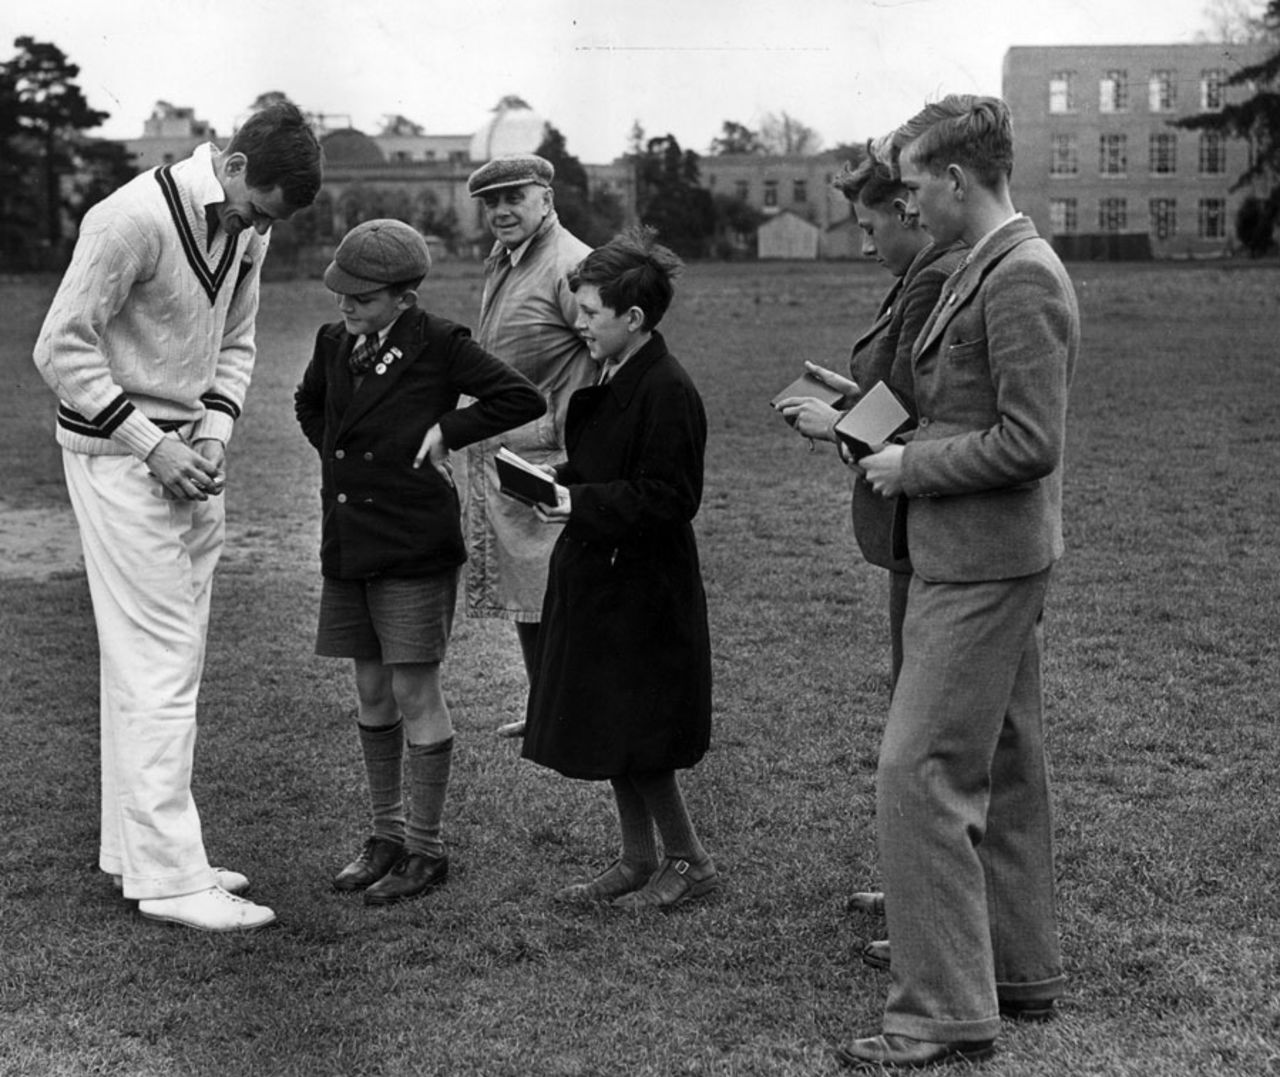 Clive van Ryneveld signs autographs for youngsters during a tour match against Oxford, Oxford University v South Africans, May 23, 1951